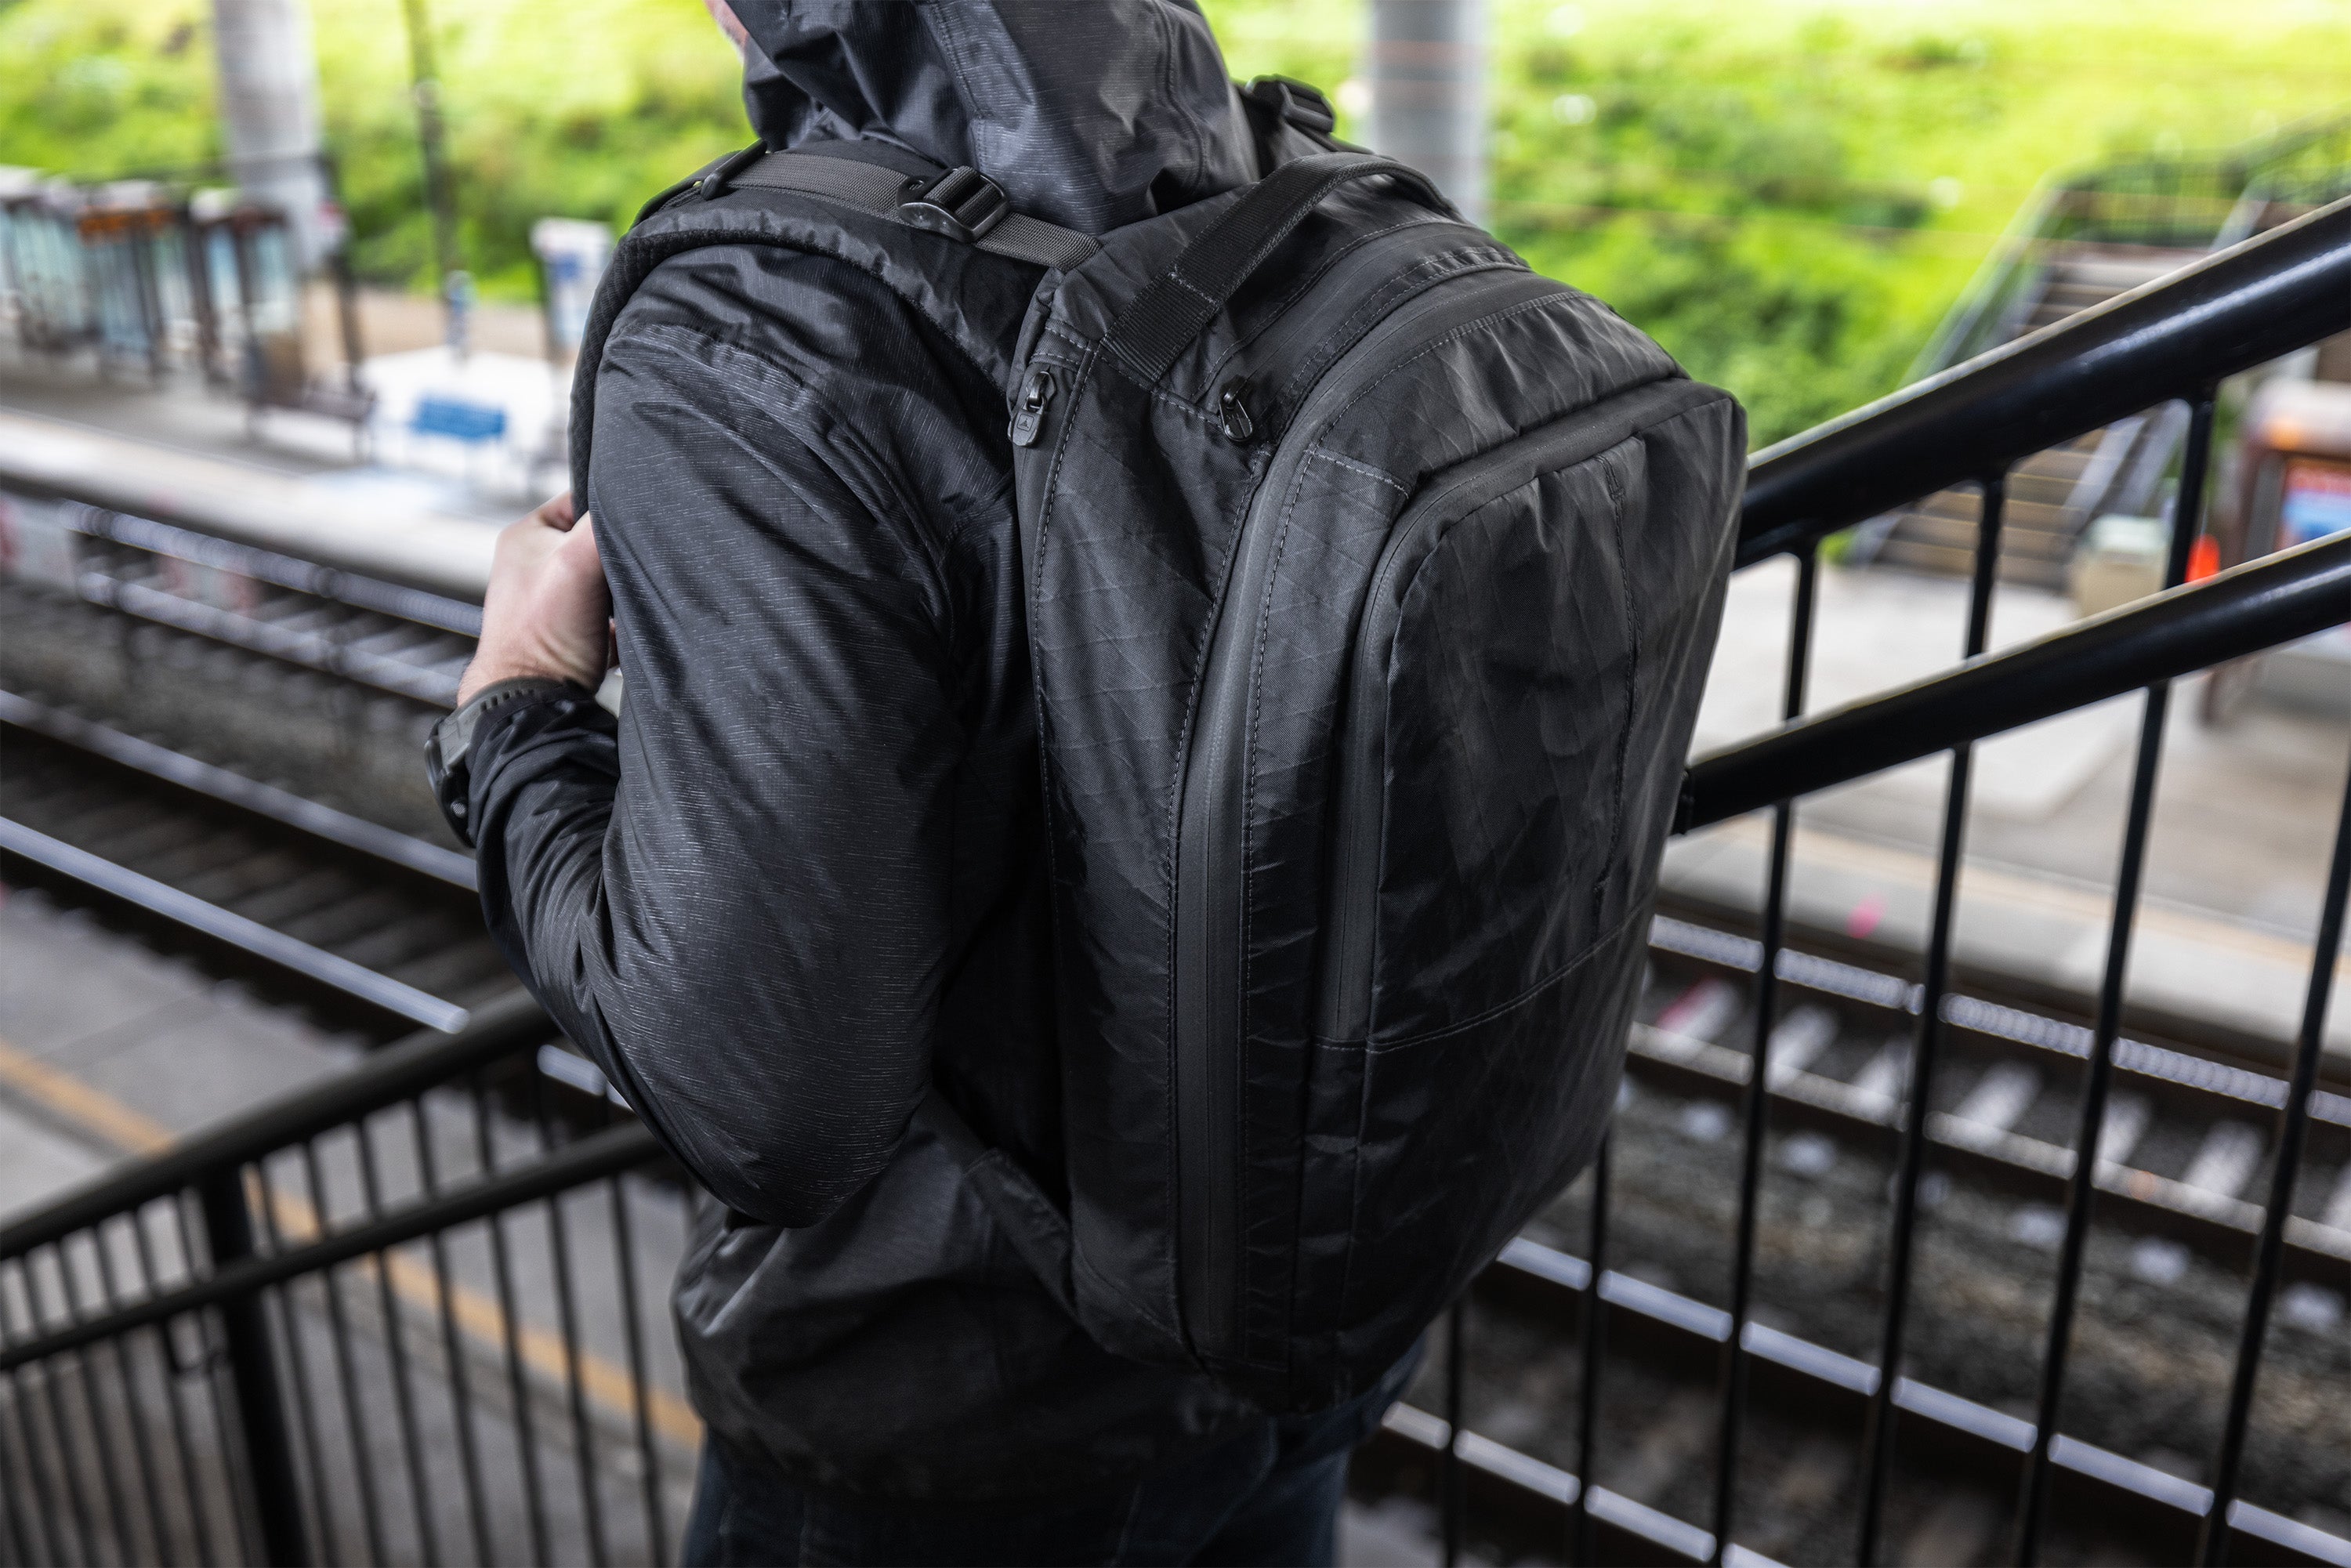 Packs and Bags | Triple Aught Design